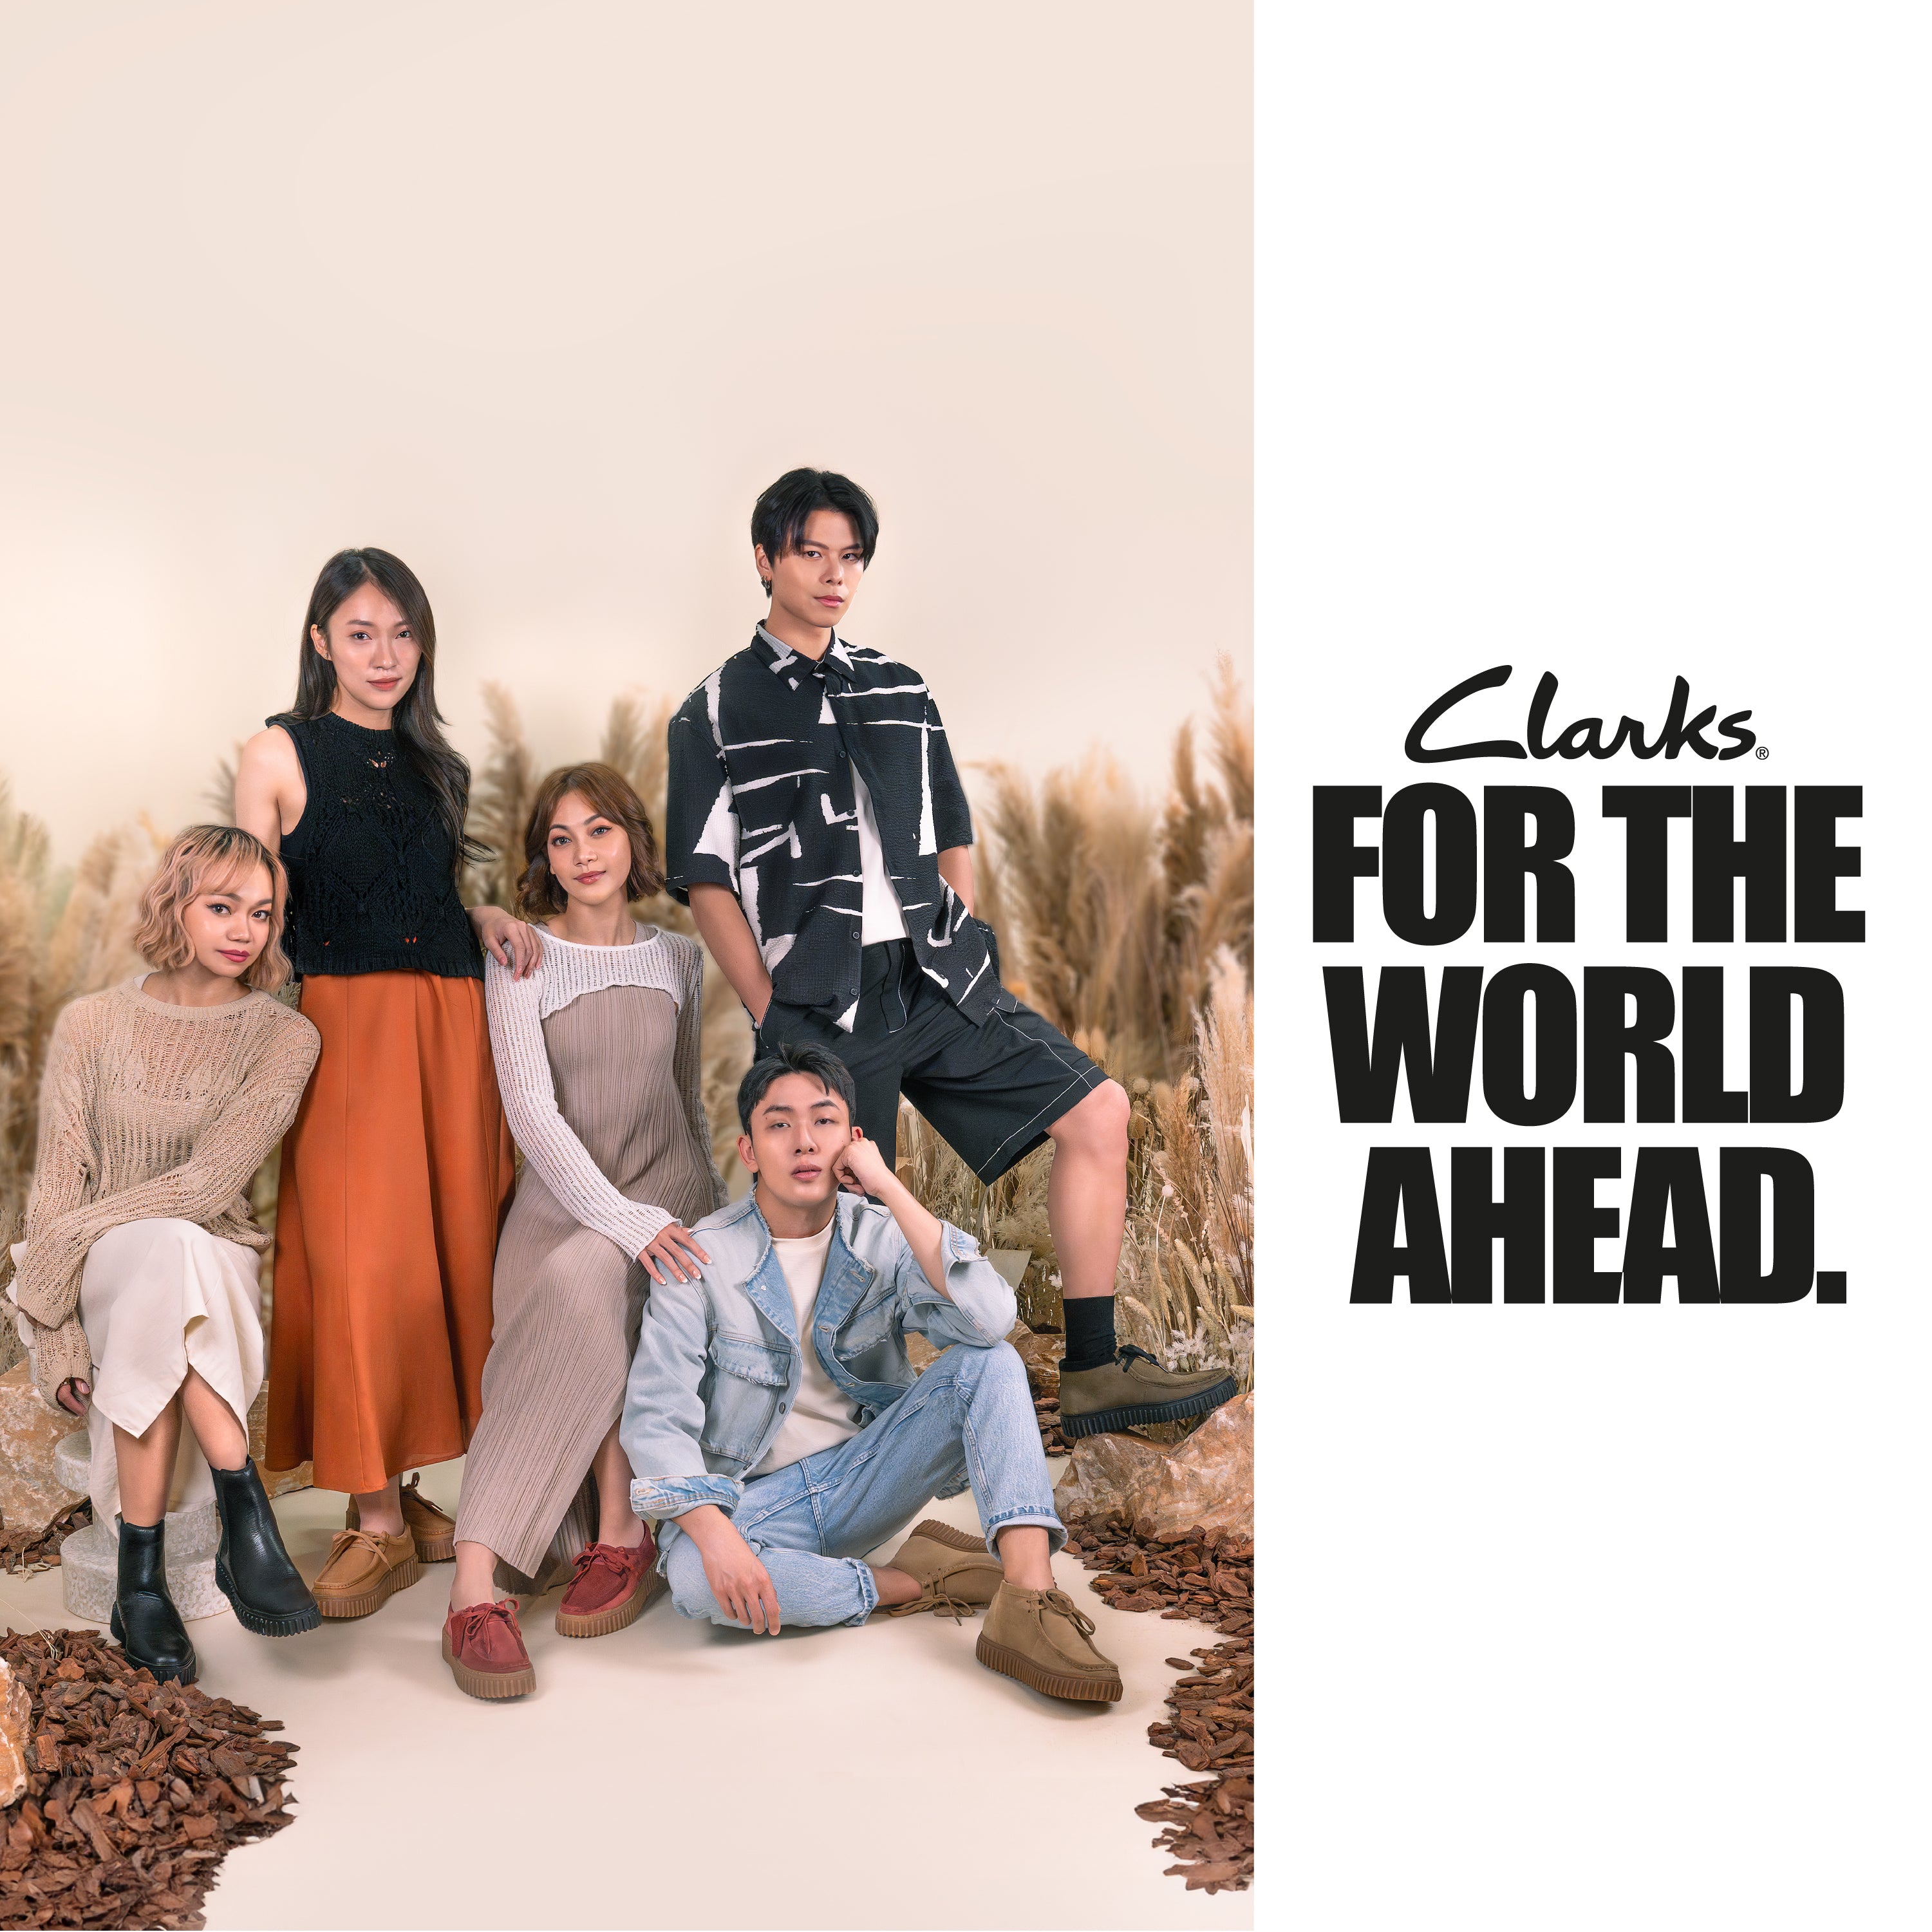 The Clarks Collective Uniting For The World Ahead